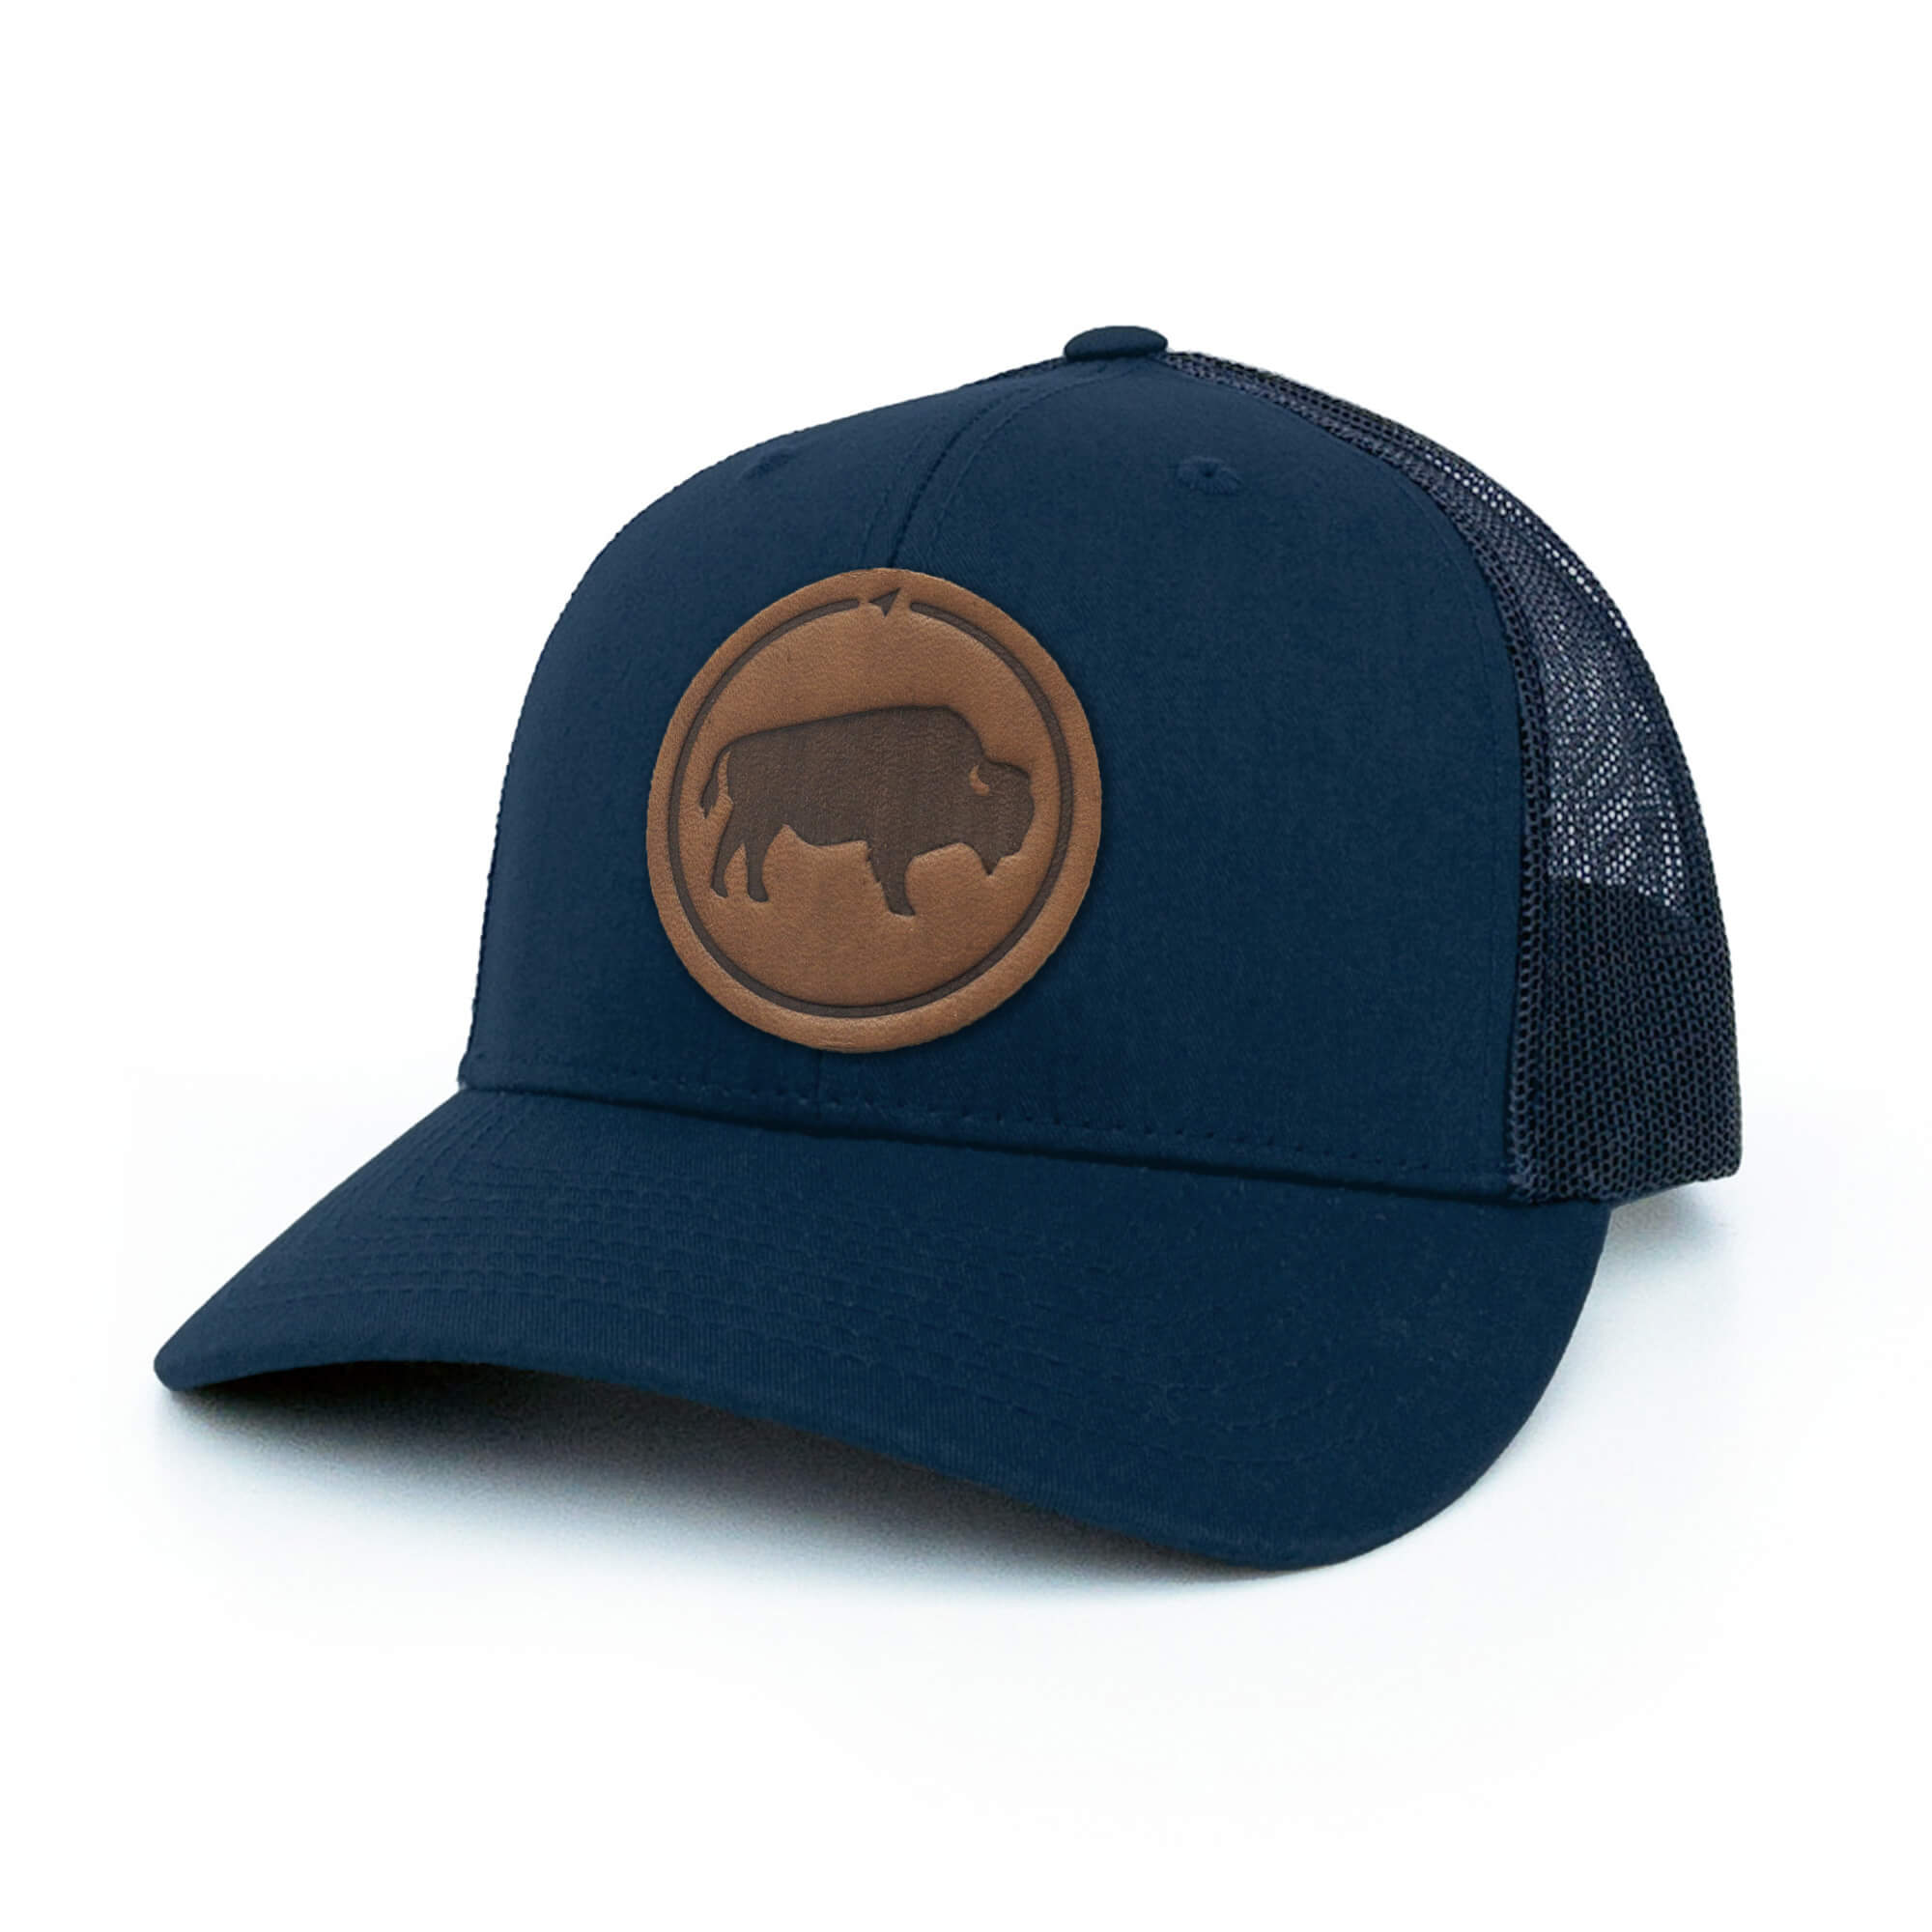 Navy trucker hat with full-grain leather patch of Bison | BLACK-004-010, CHARC-004-010, NAVY-004-010, HGREY-004-010, MOSS-004-010, BROWN-004-010